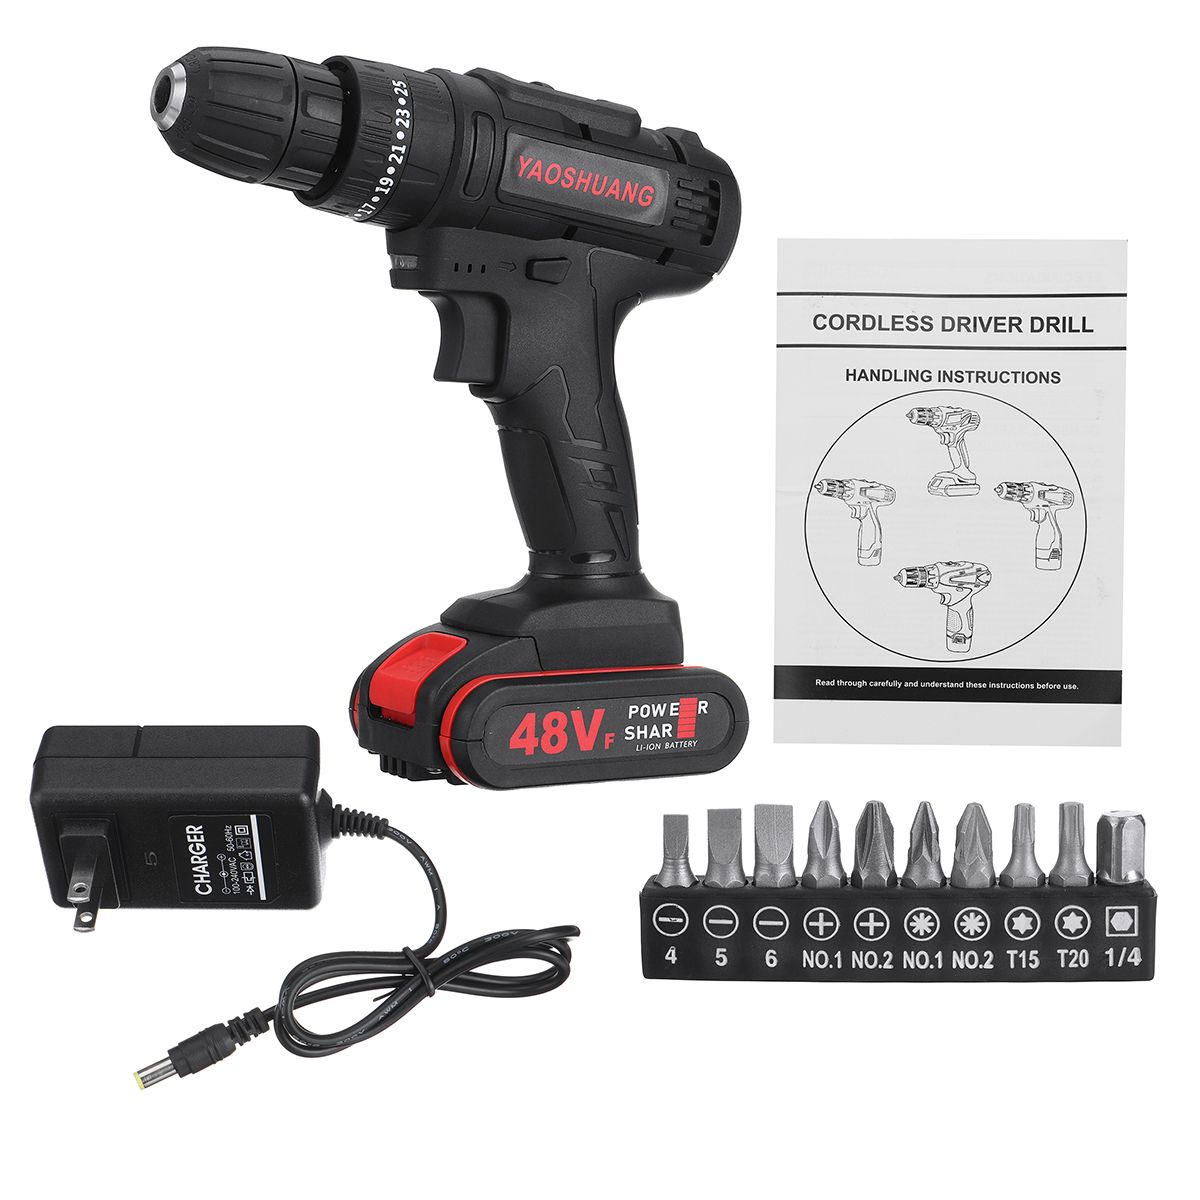 48V-38quot-Cordless-Rechargeable-Electric-Impact-Hammer-Screwdriver-Drill-with-1-Battery-1632693